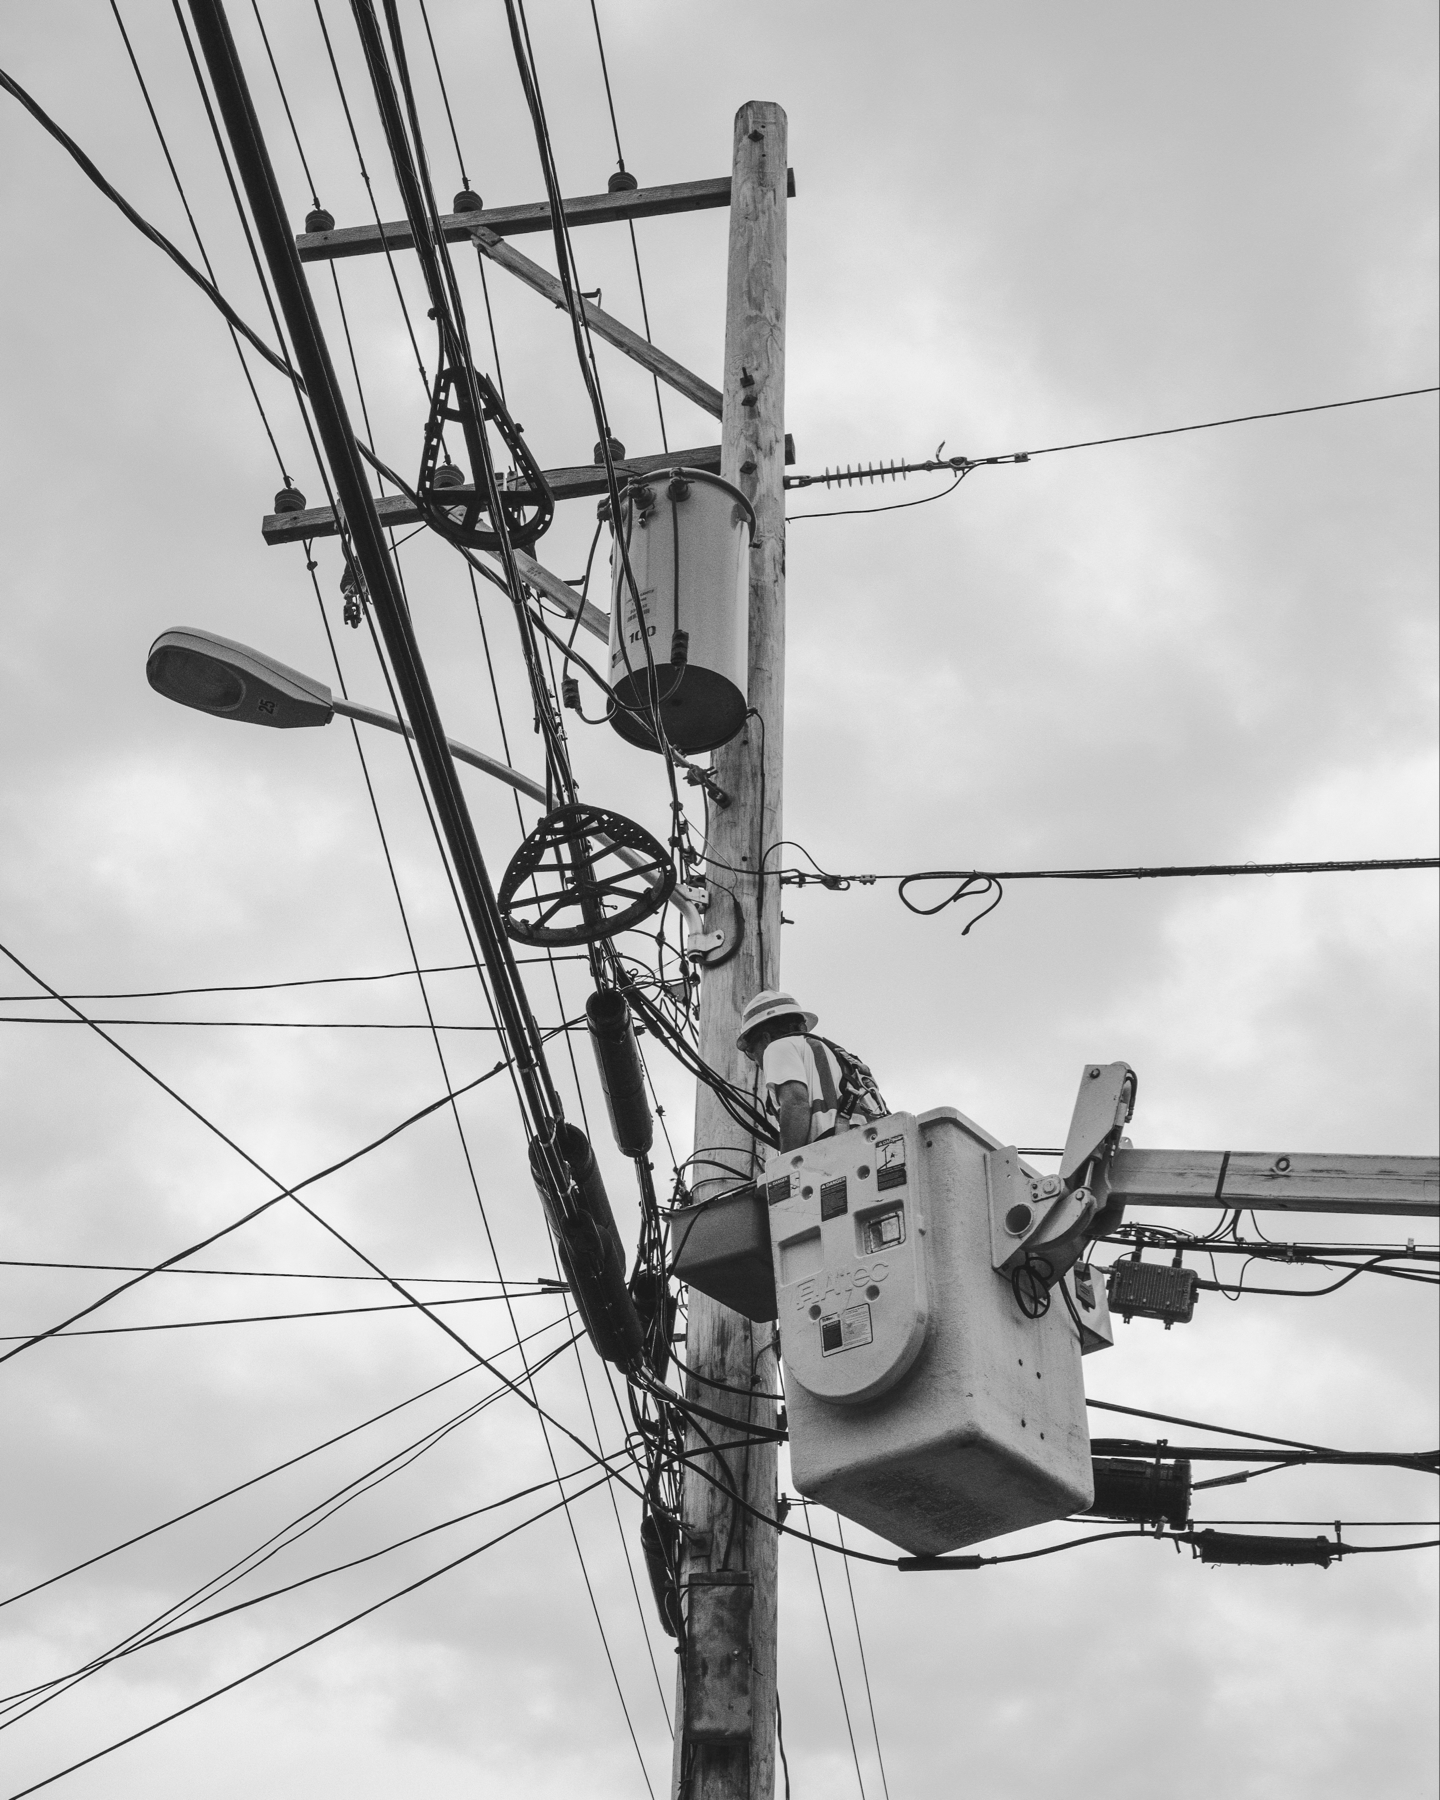 A black and white photo of a utility pole with a transformer, multiple cables, and a street light against a cloudy sky.